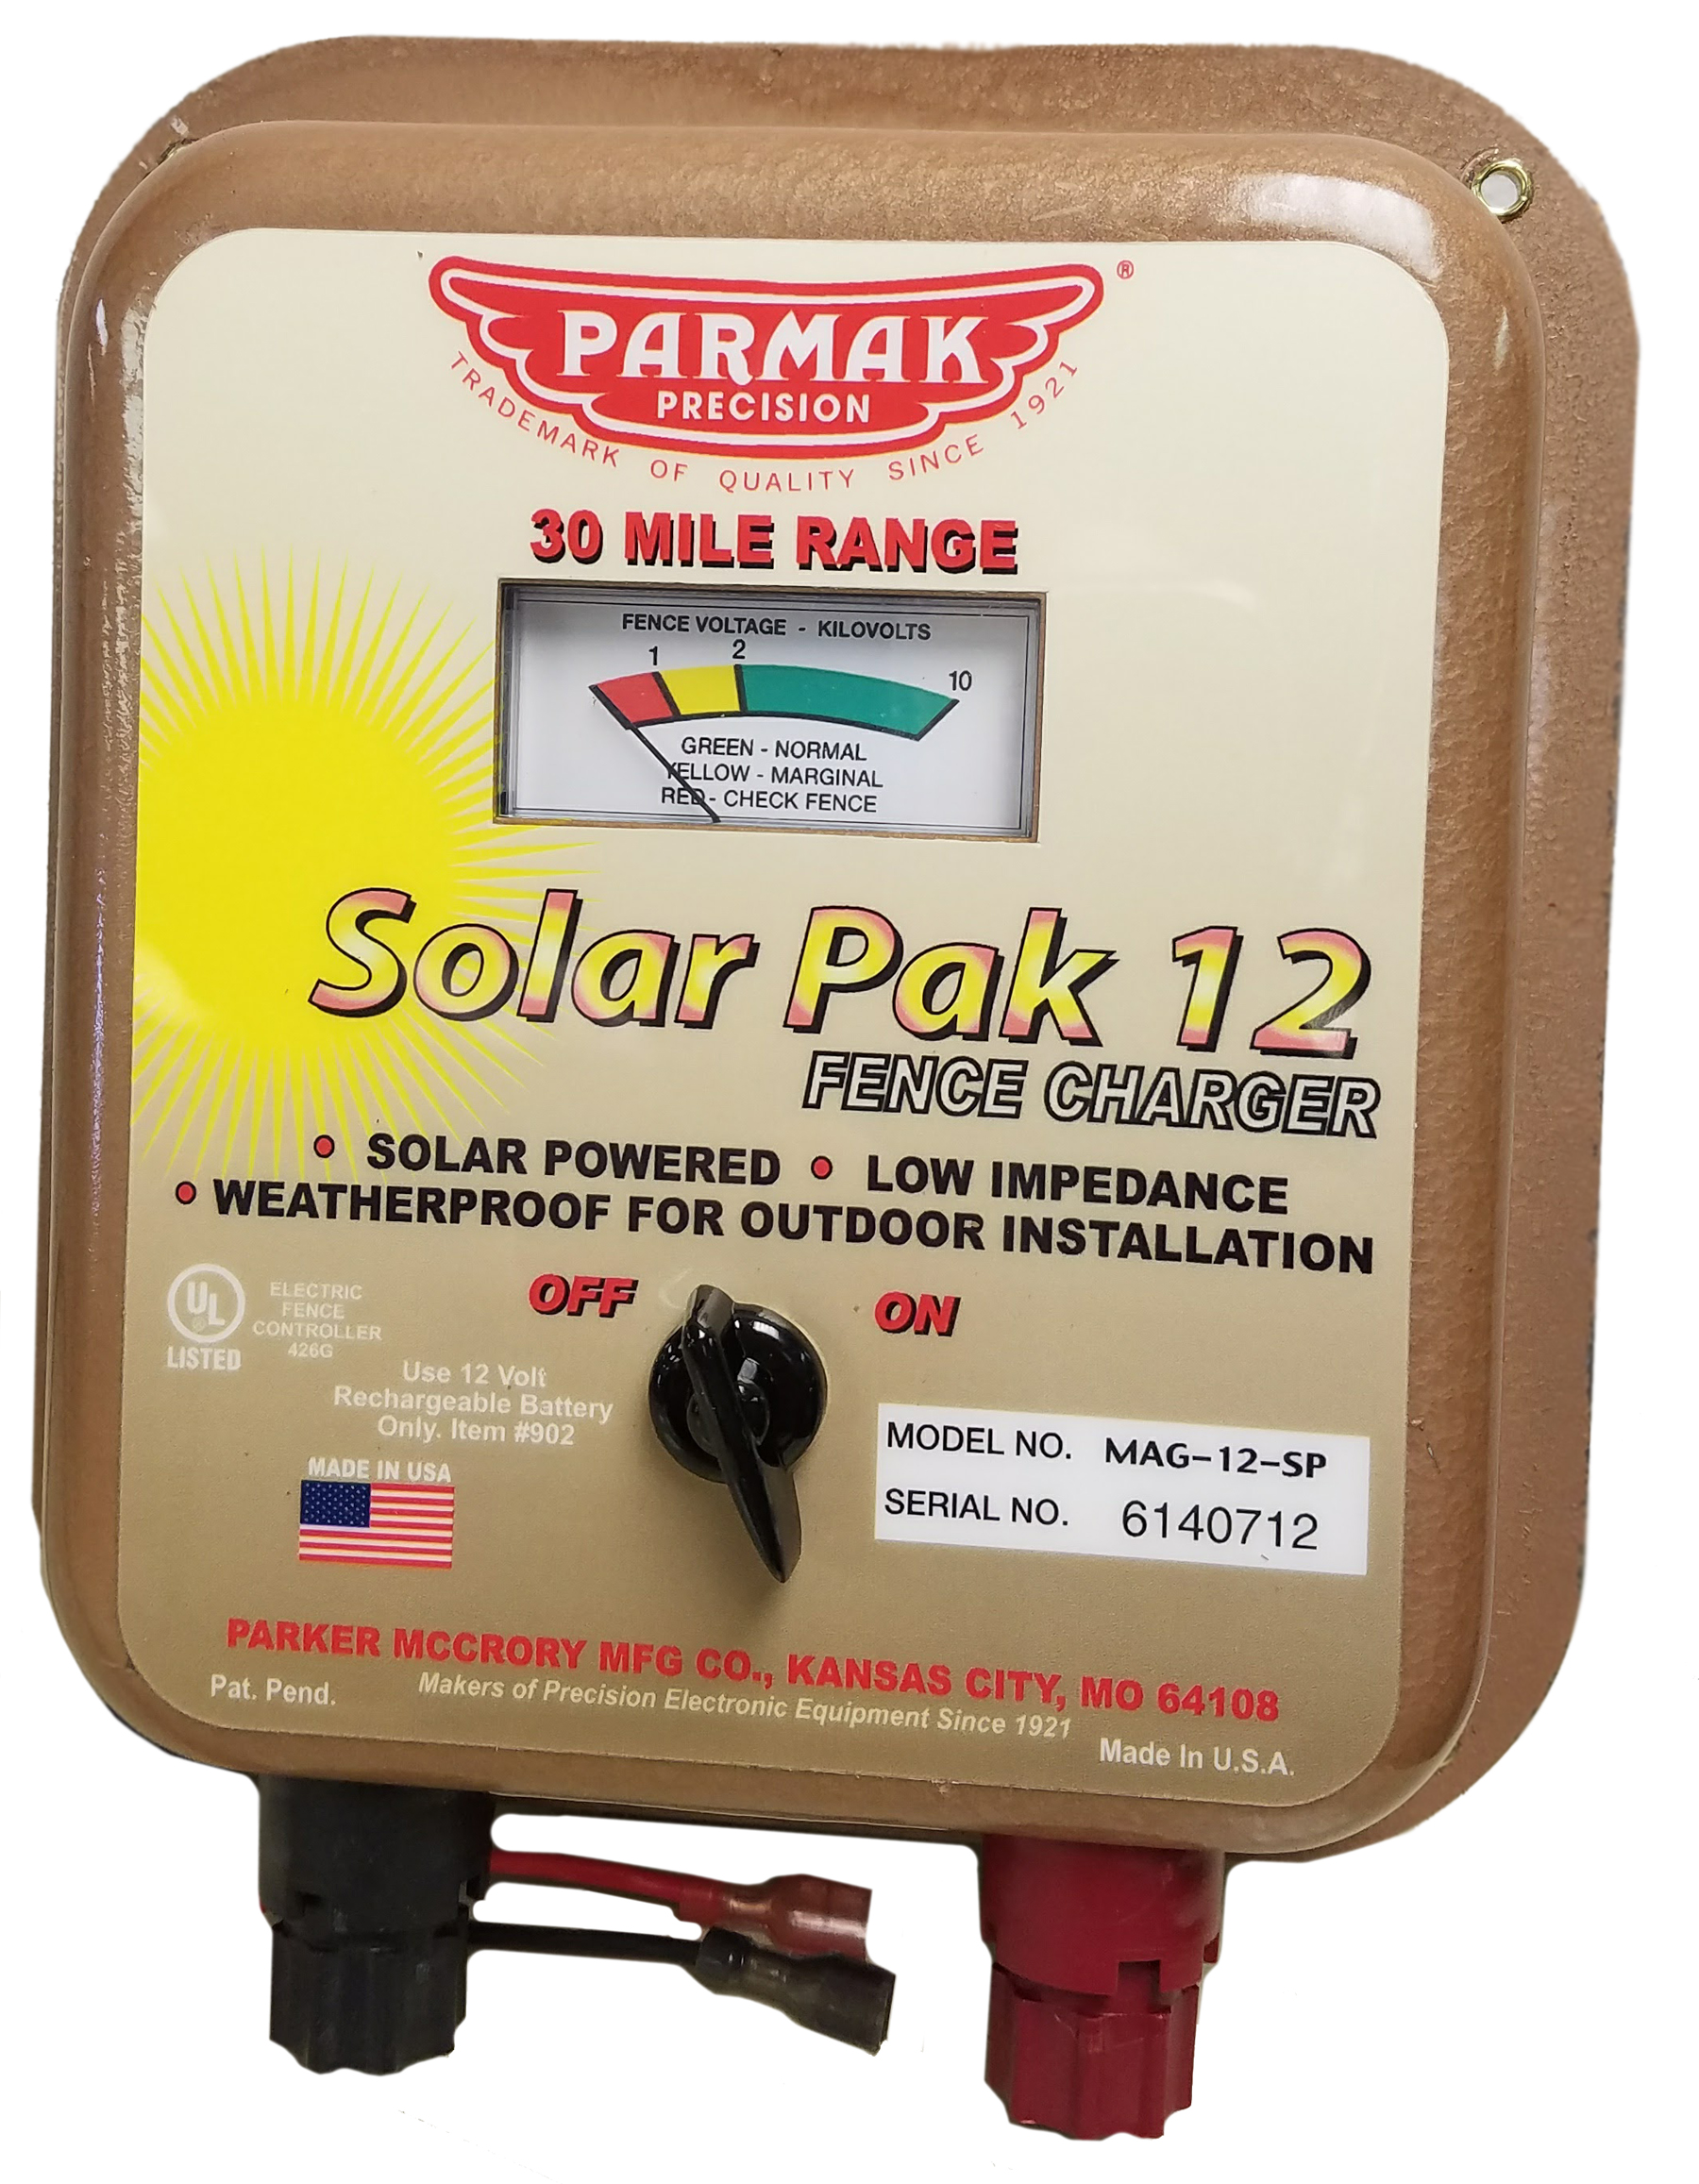 Parker McCrory Parmak MAG12UO Magnum 12 30 Mile Battery Operated Fence Charger 